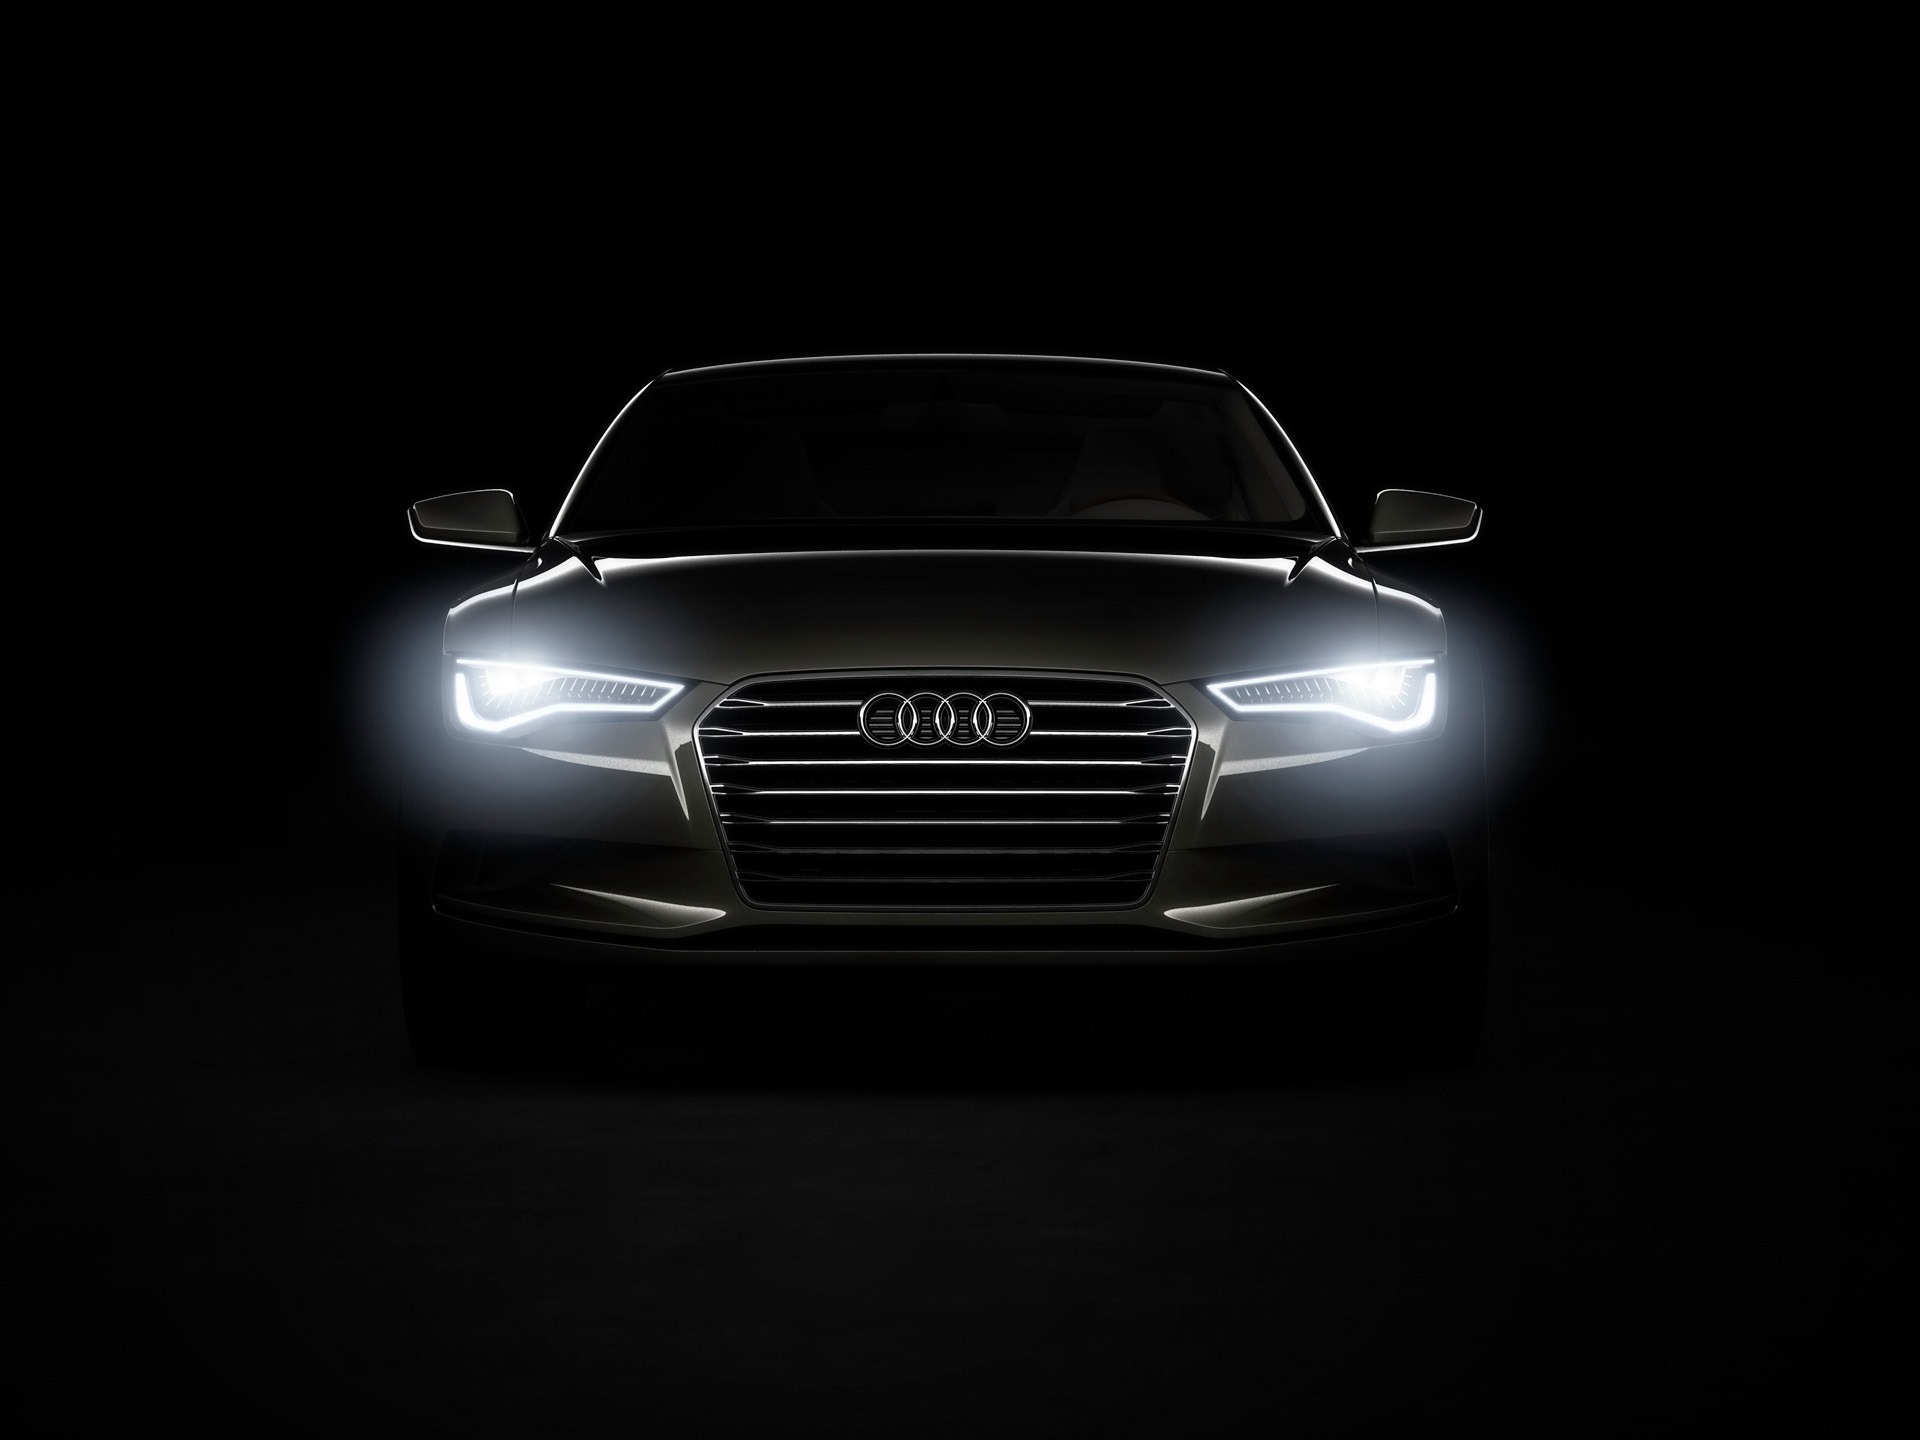 Audi A7 Concept Wallpaper Cars In Jpg Format For